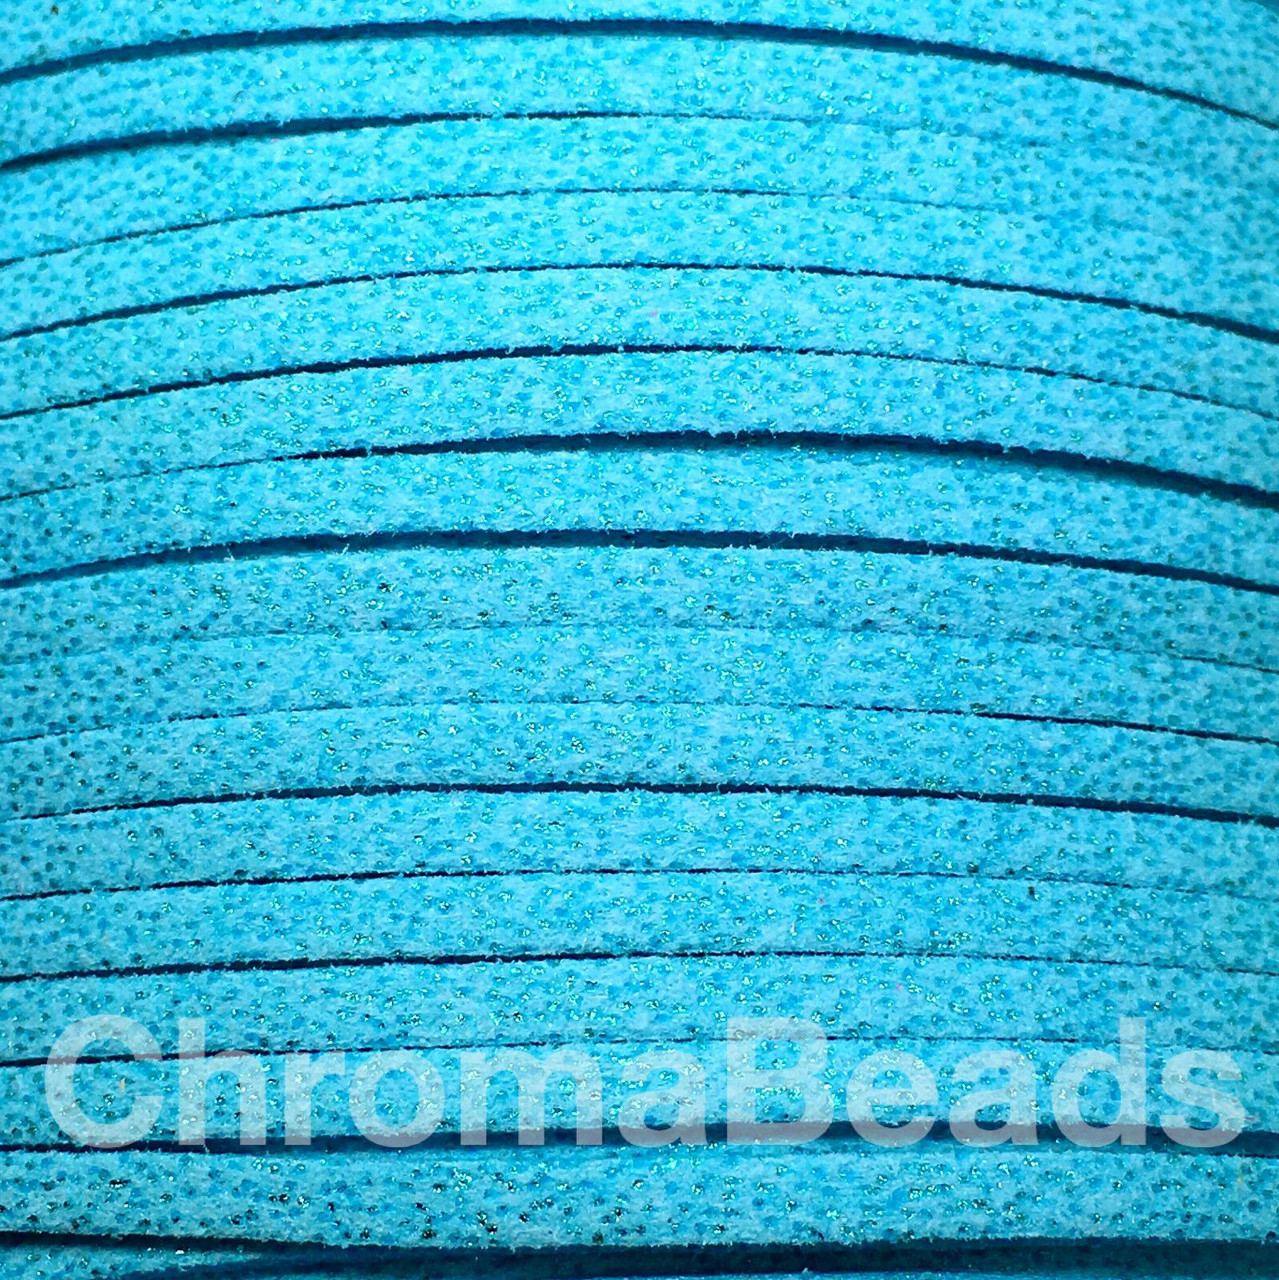 Faux Suede Cord Reel - approx 90m, 3mm wide [Turquoise Glitter]